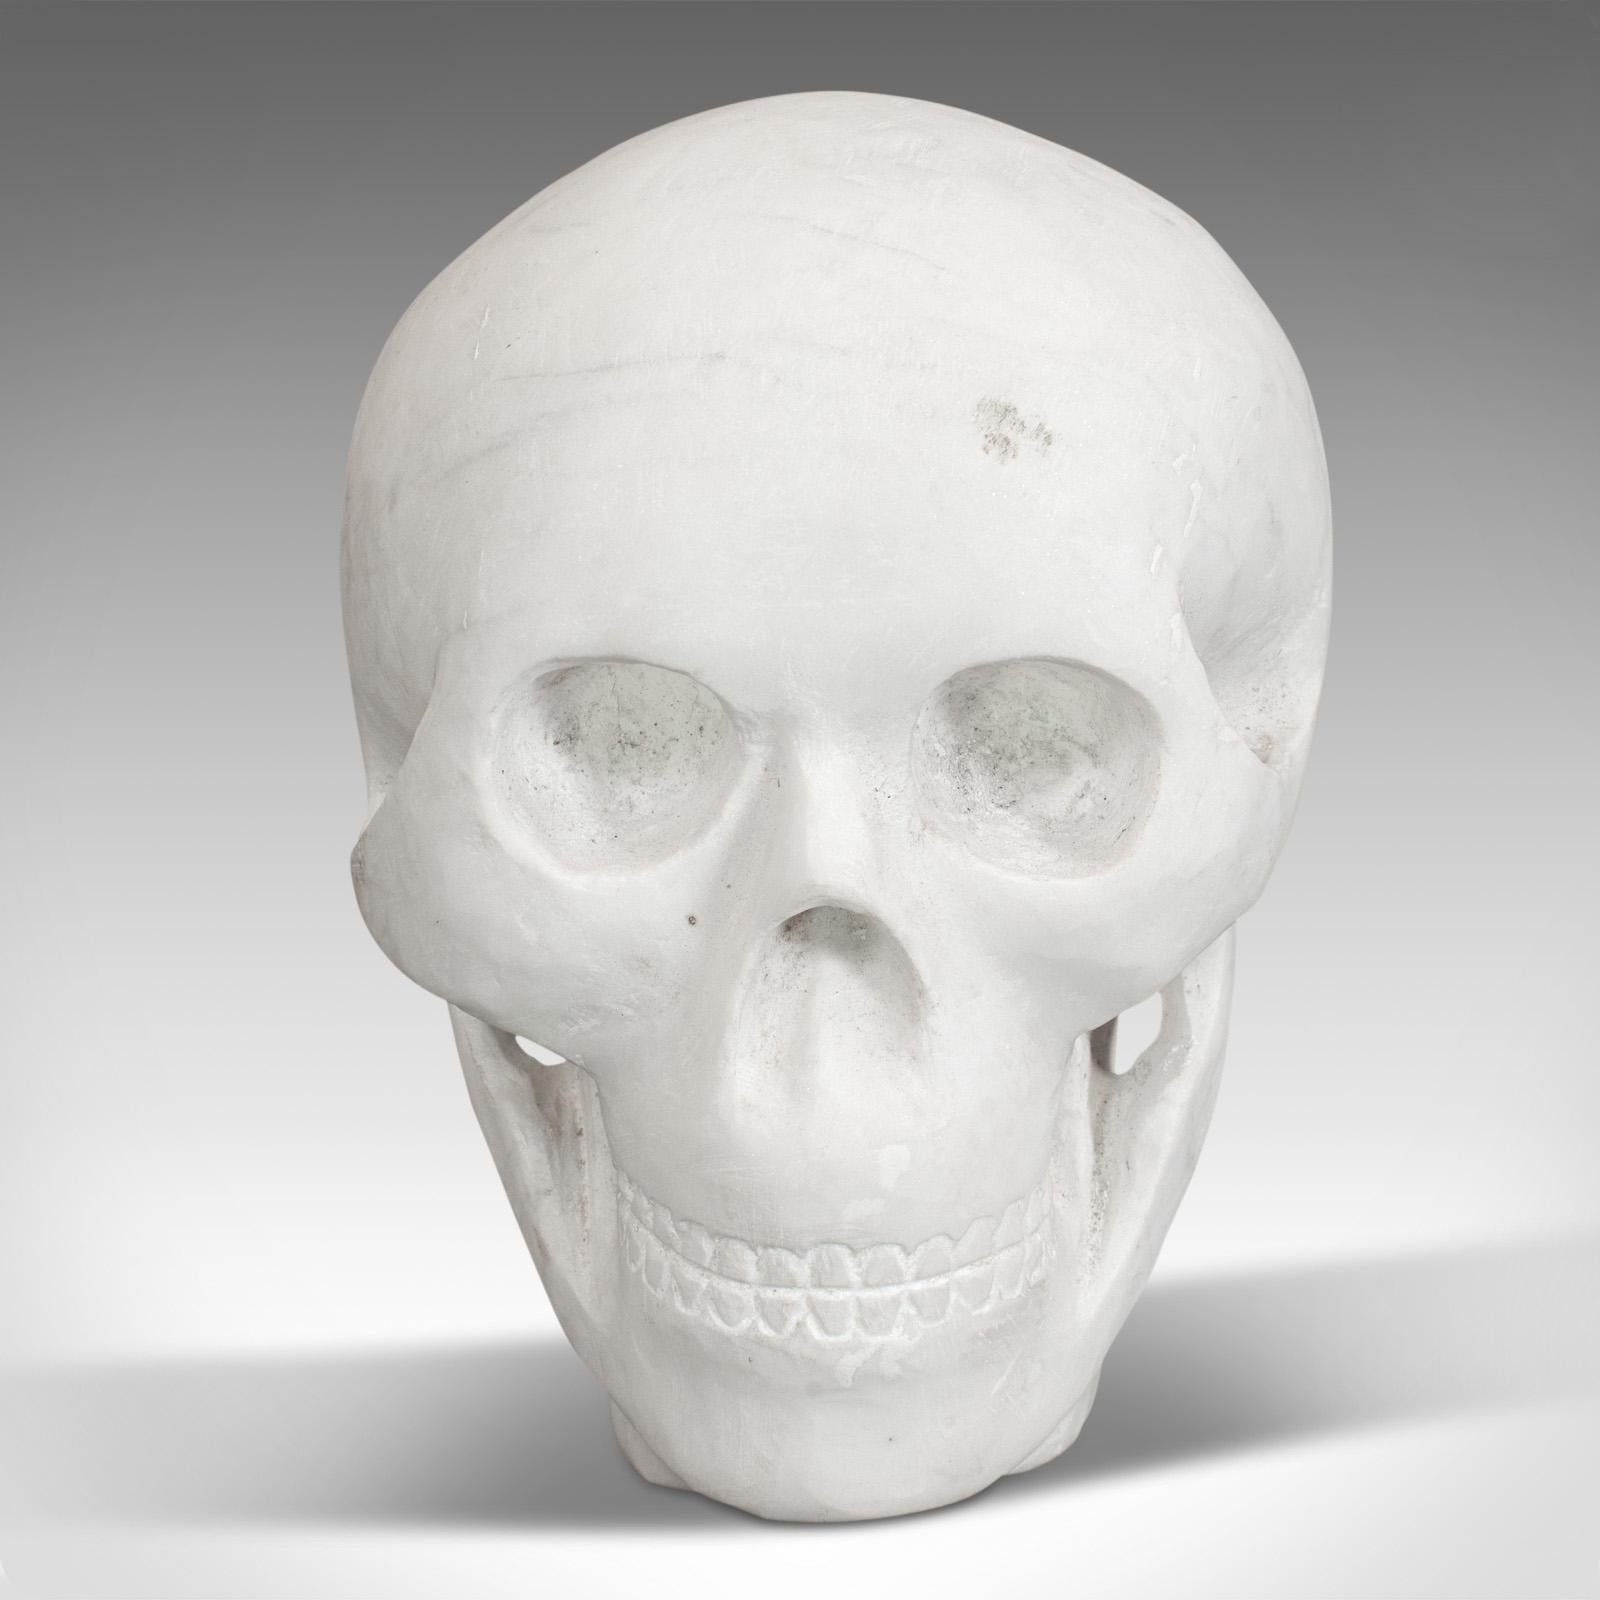 This is a vintage decorative skull. An English, white marble decorative desk ornament or paperweight, dating to the late 20th century.

Unusual subject makes for an interesting conversation piece
Displays a desirable aged patina
Skillfully hewn